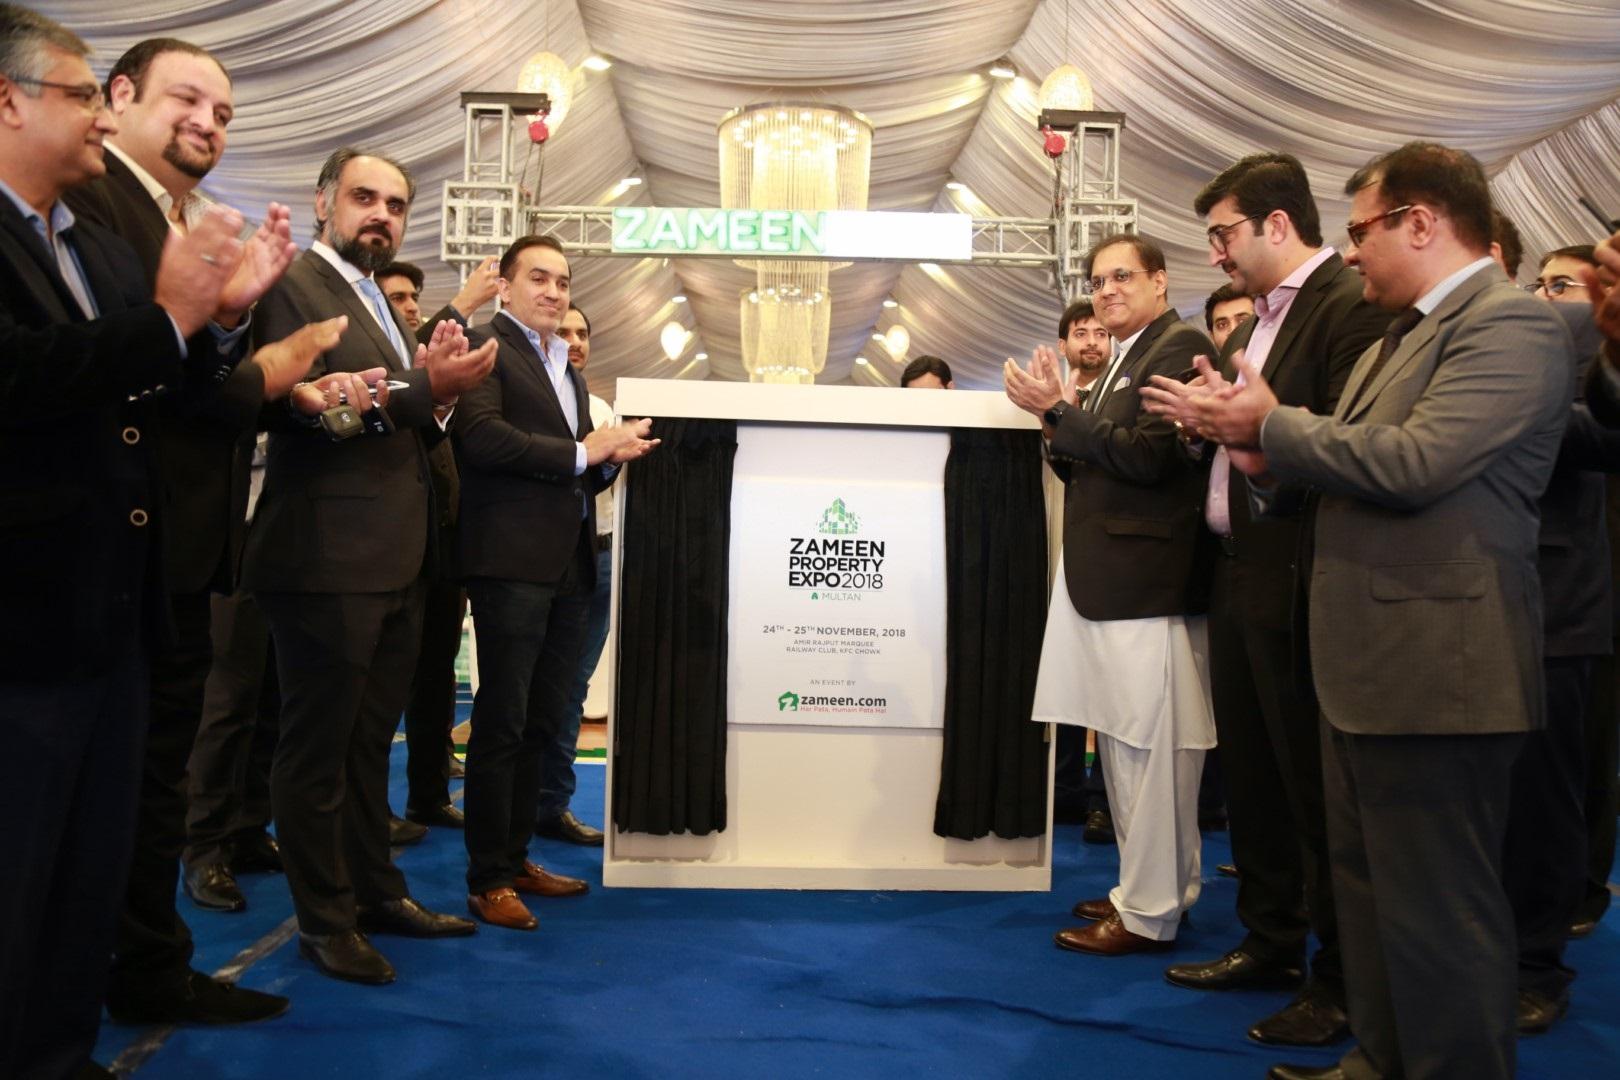 Zameen.com successfully holds first event in Multan with thousands of visitors attending